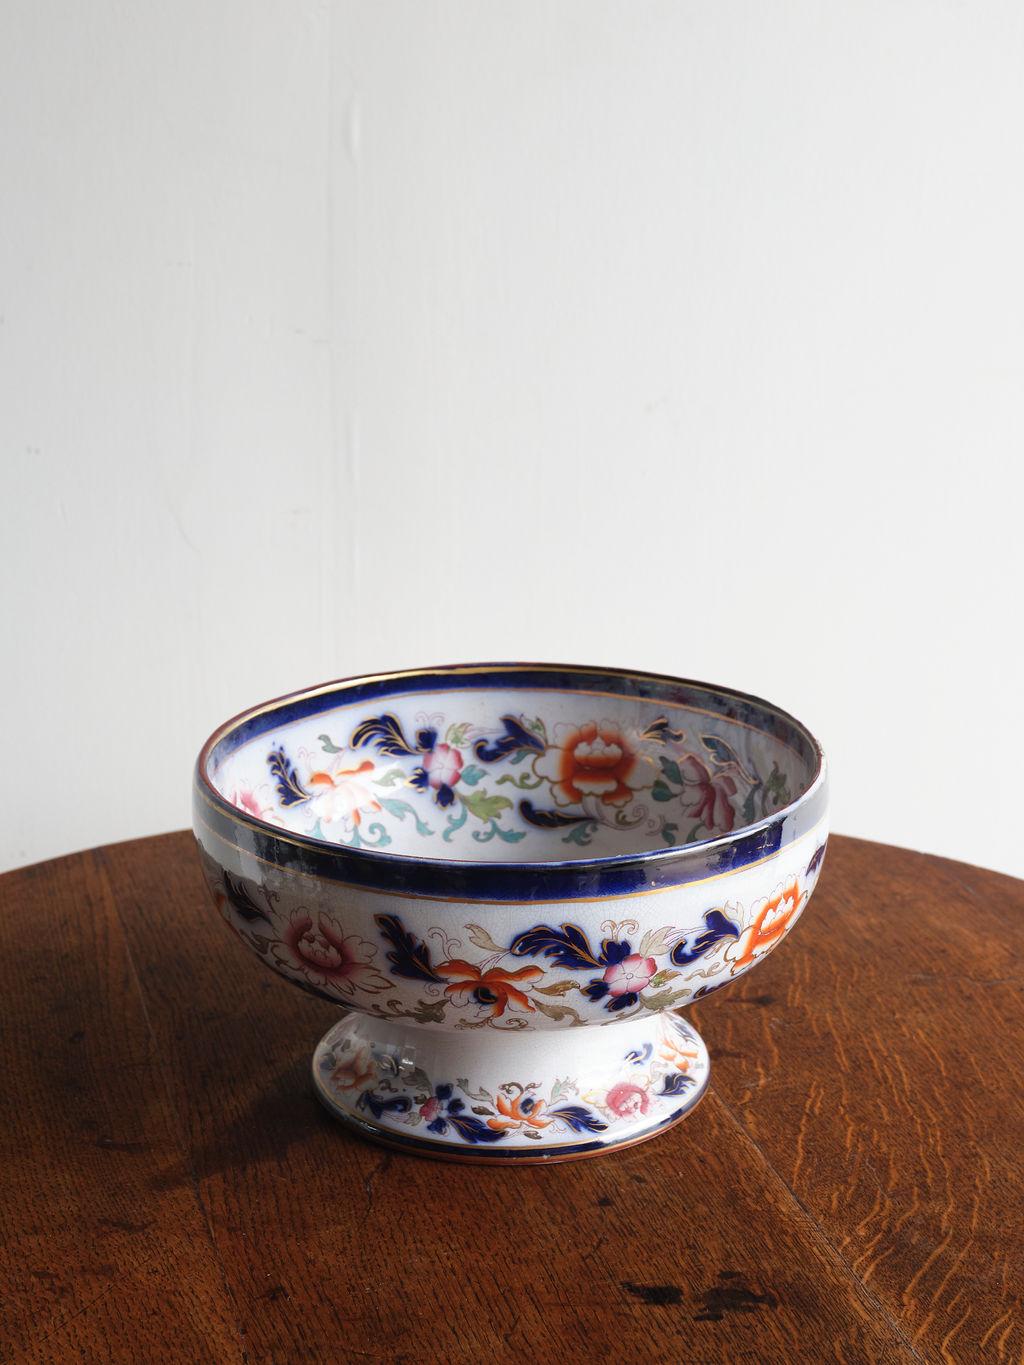 This lovely patterned ceramic bowl was crafted and hand painted in 1860 England. The floral details feature deep blue, dark orange and pink, and light tan and green coloring. There is a gold trim around the top and bottom of the dish. This bowl